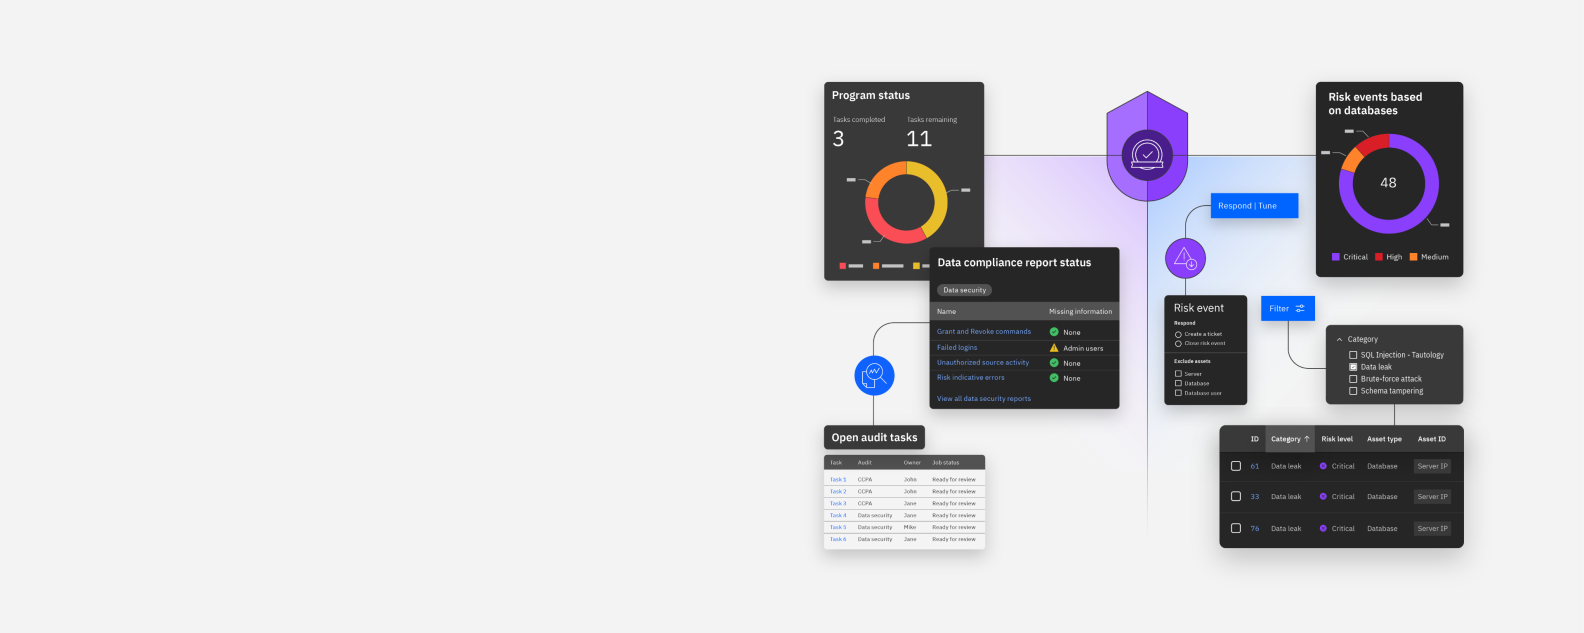 Illustration of Guardium Insights product UI and security elements